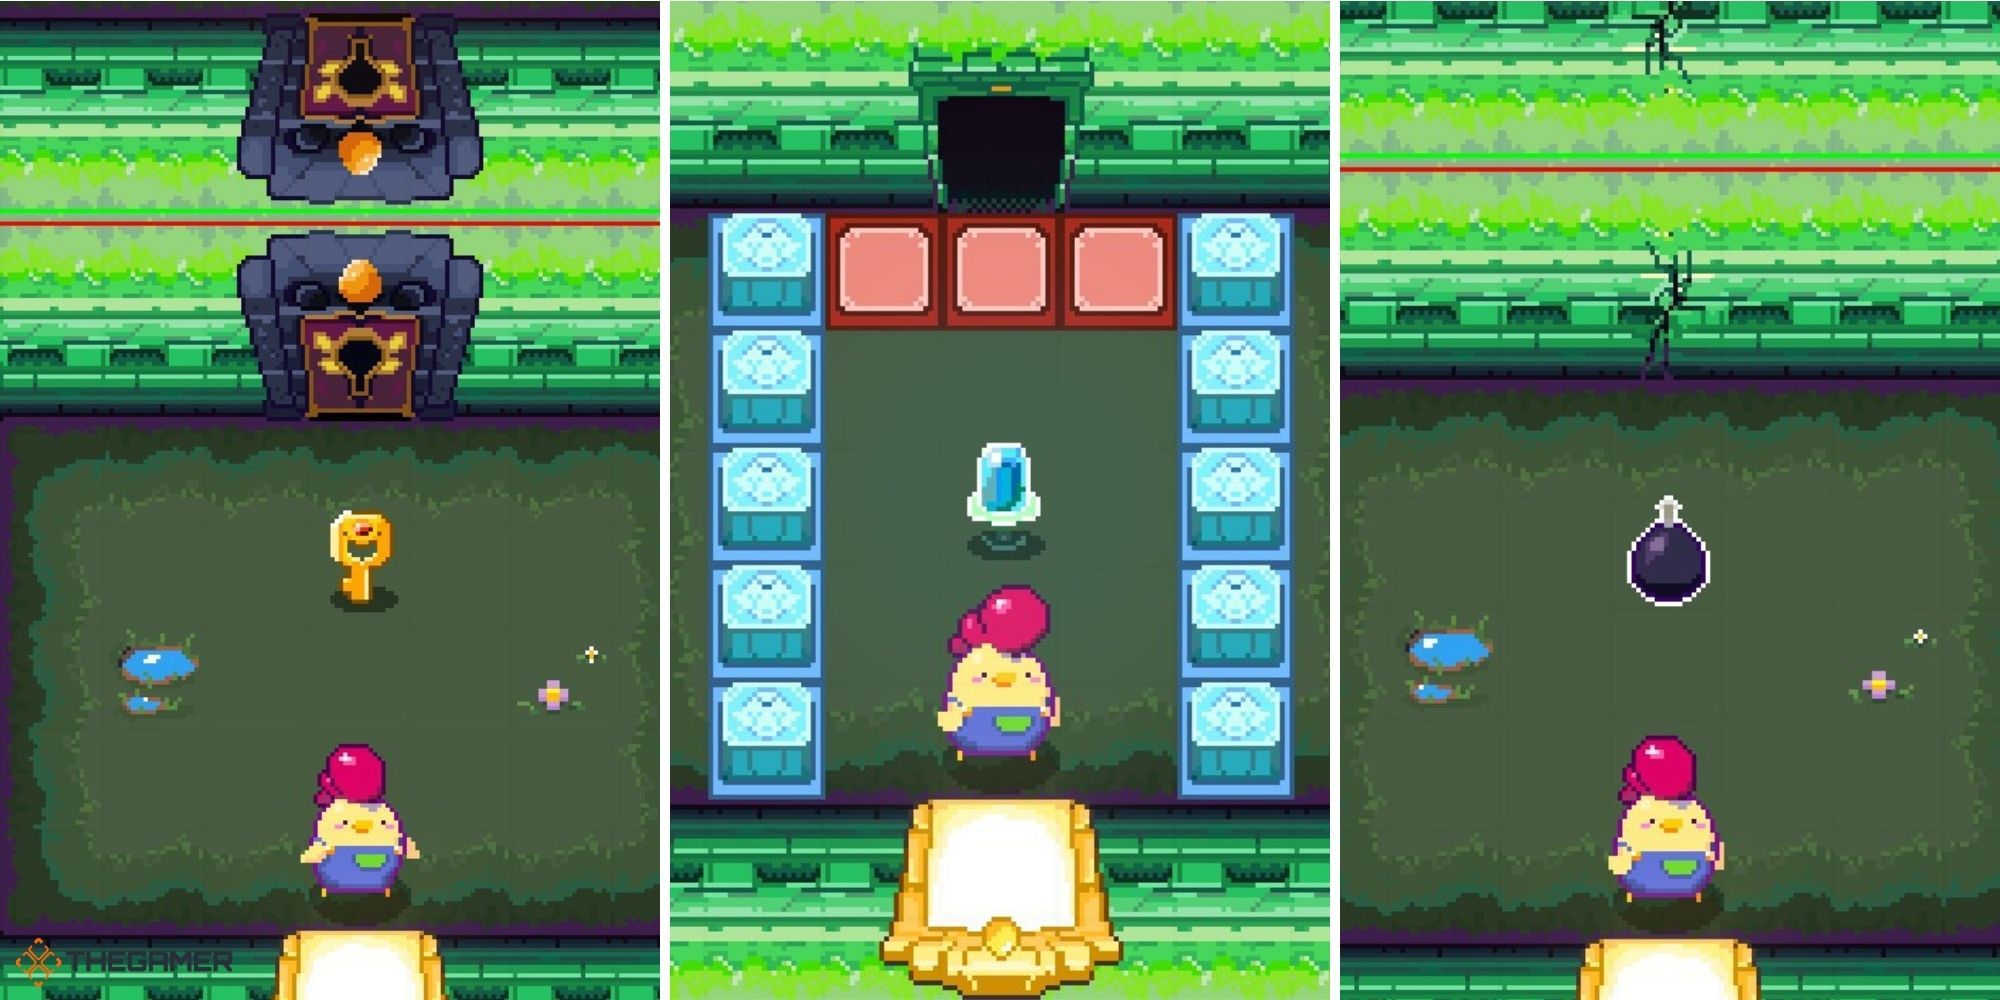 Super Dungeon Maker - Decorative Door on left, Switches in centre, cracked wall on right